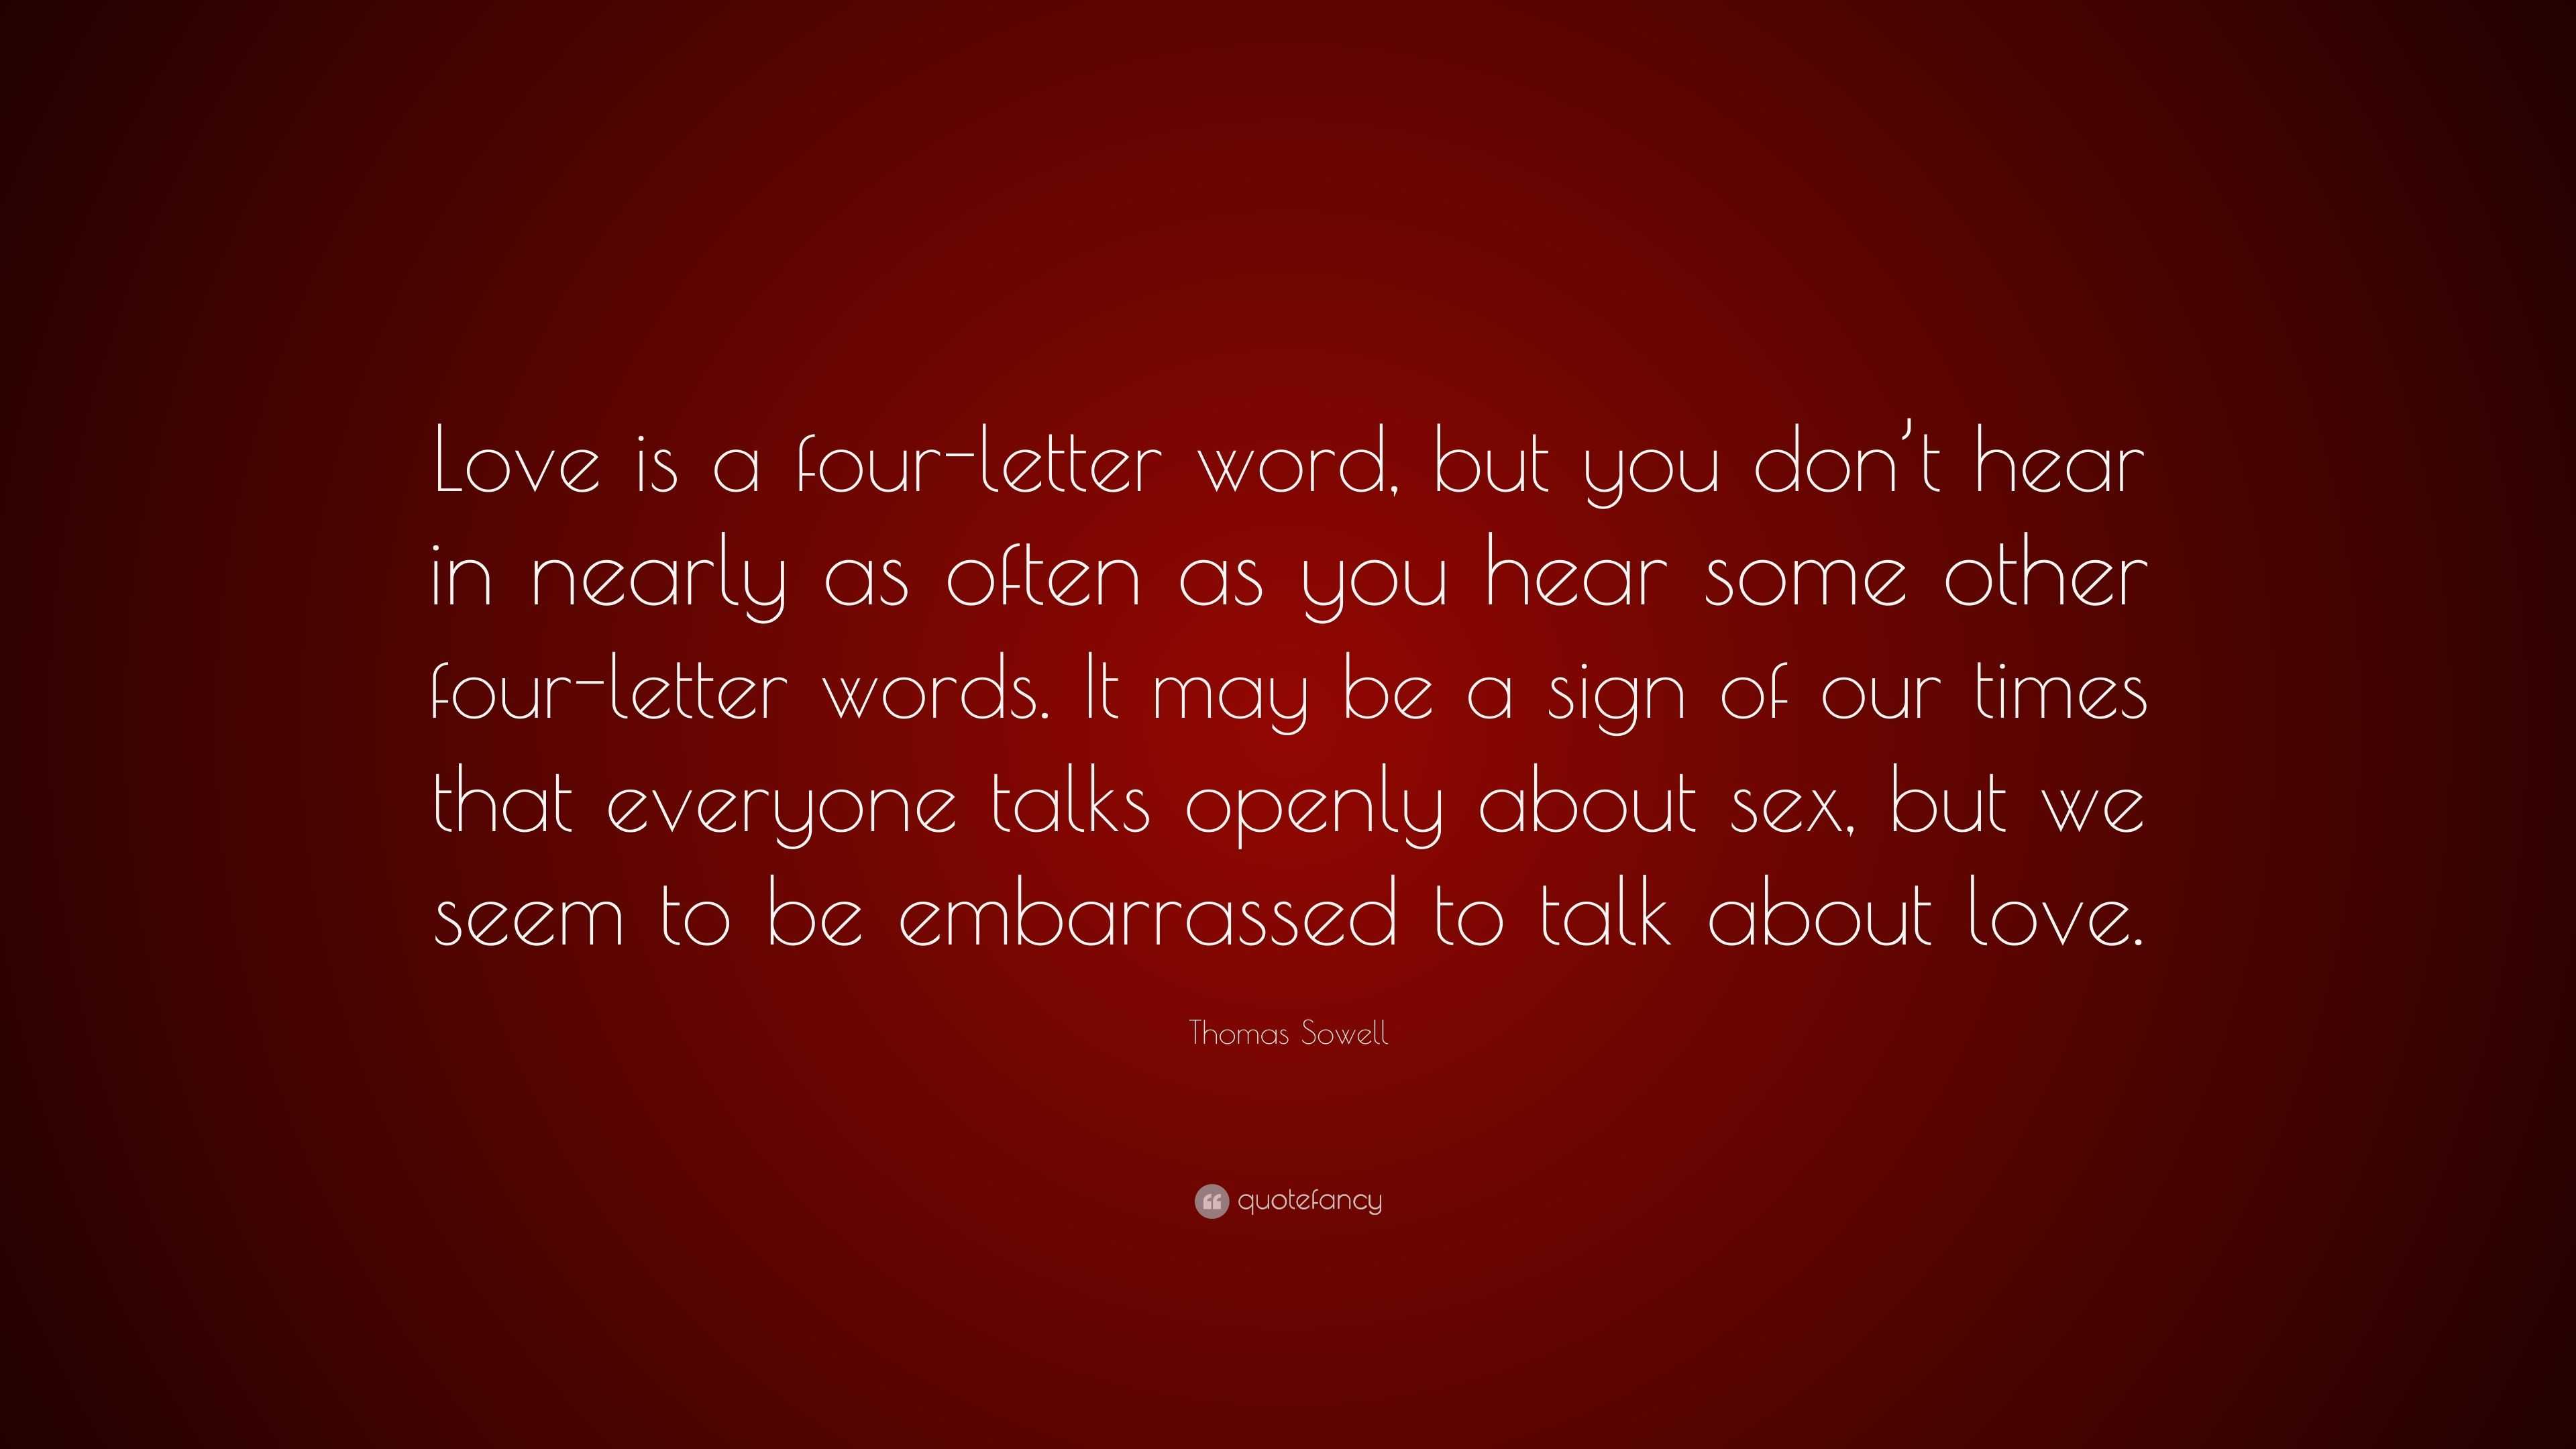 Thomas Sowell Quote: "Love is a four-letter word, but you do